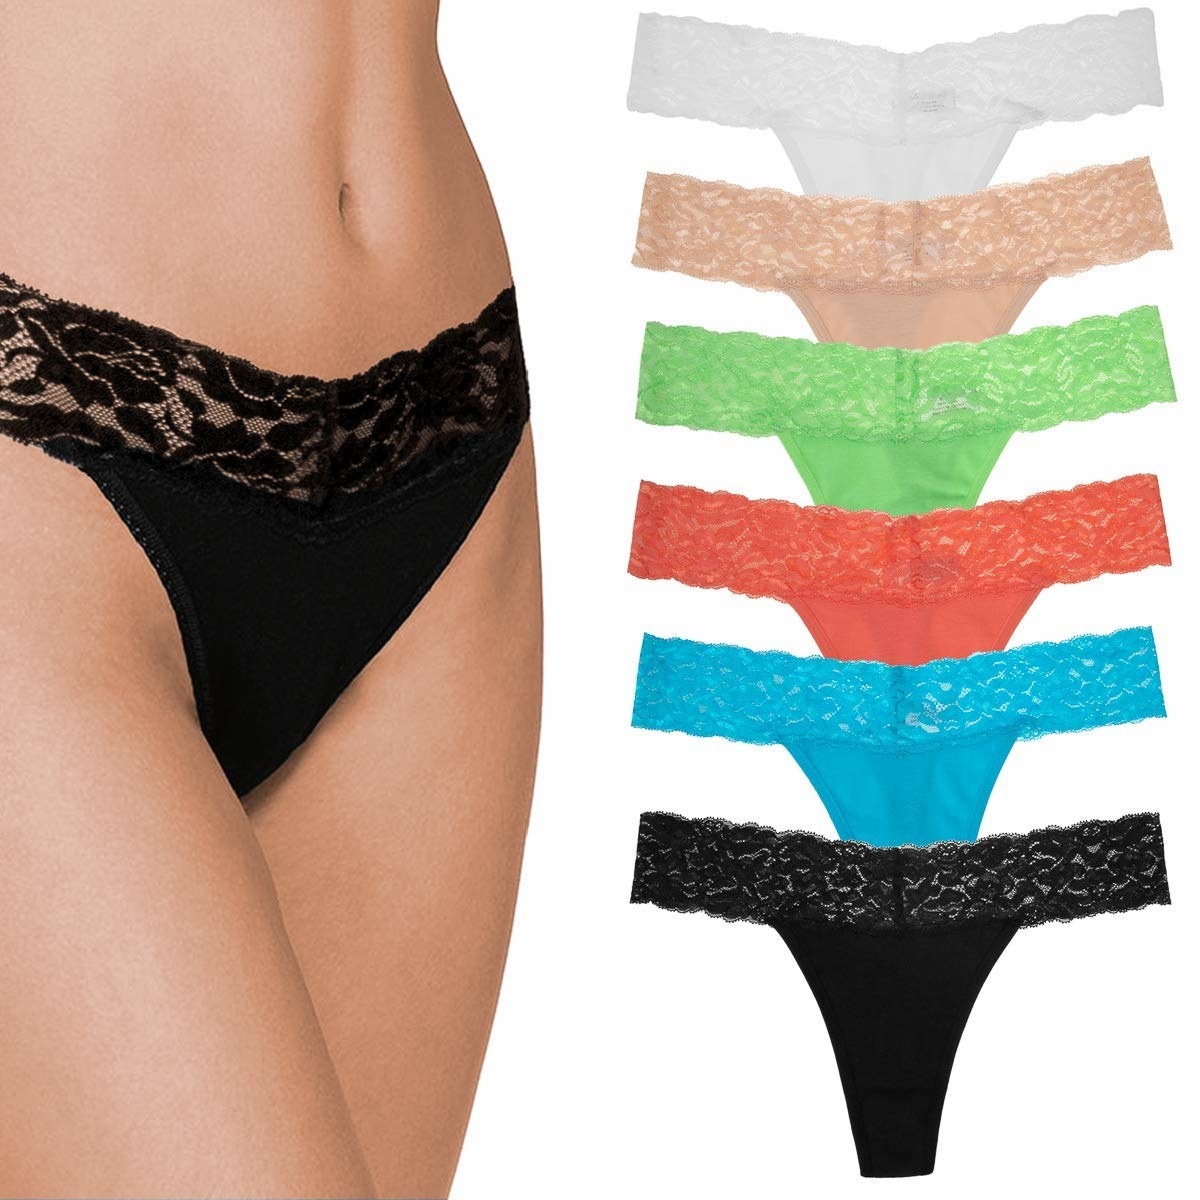 Naked black girls laced panties 31 Sexy Intimates That Are Actually Comfortable